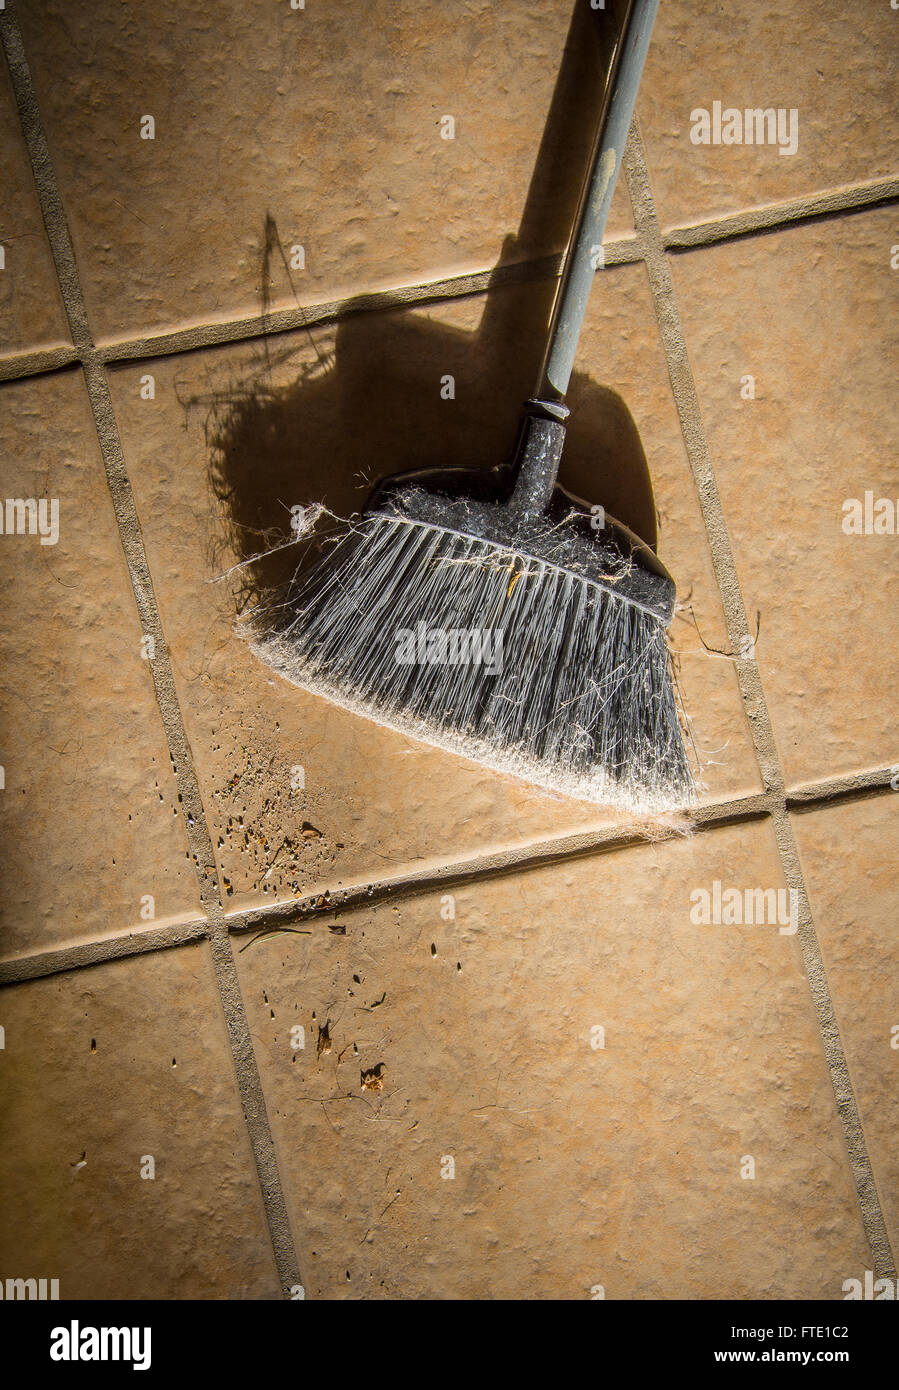 Old Broom On Tile Floor With Dirt Pile Stock Photo